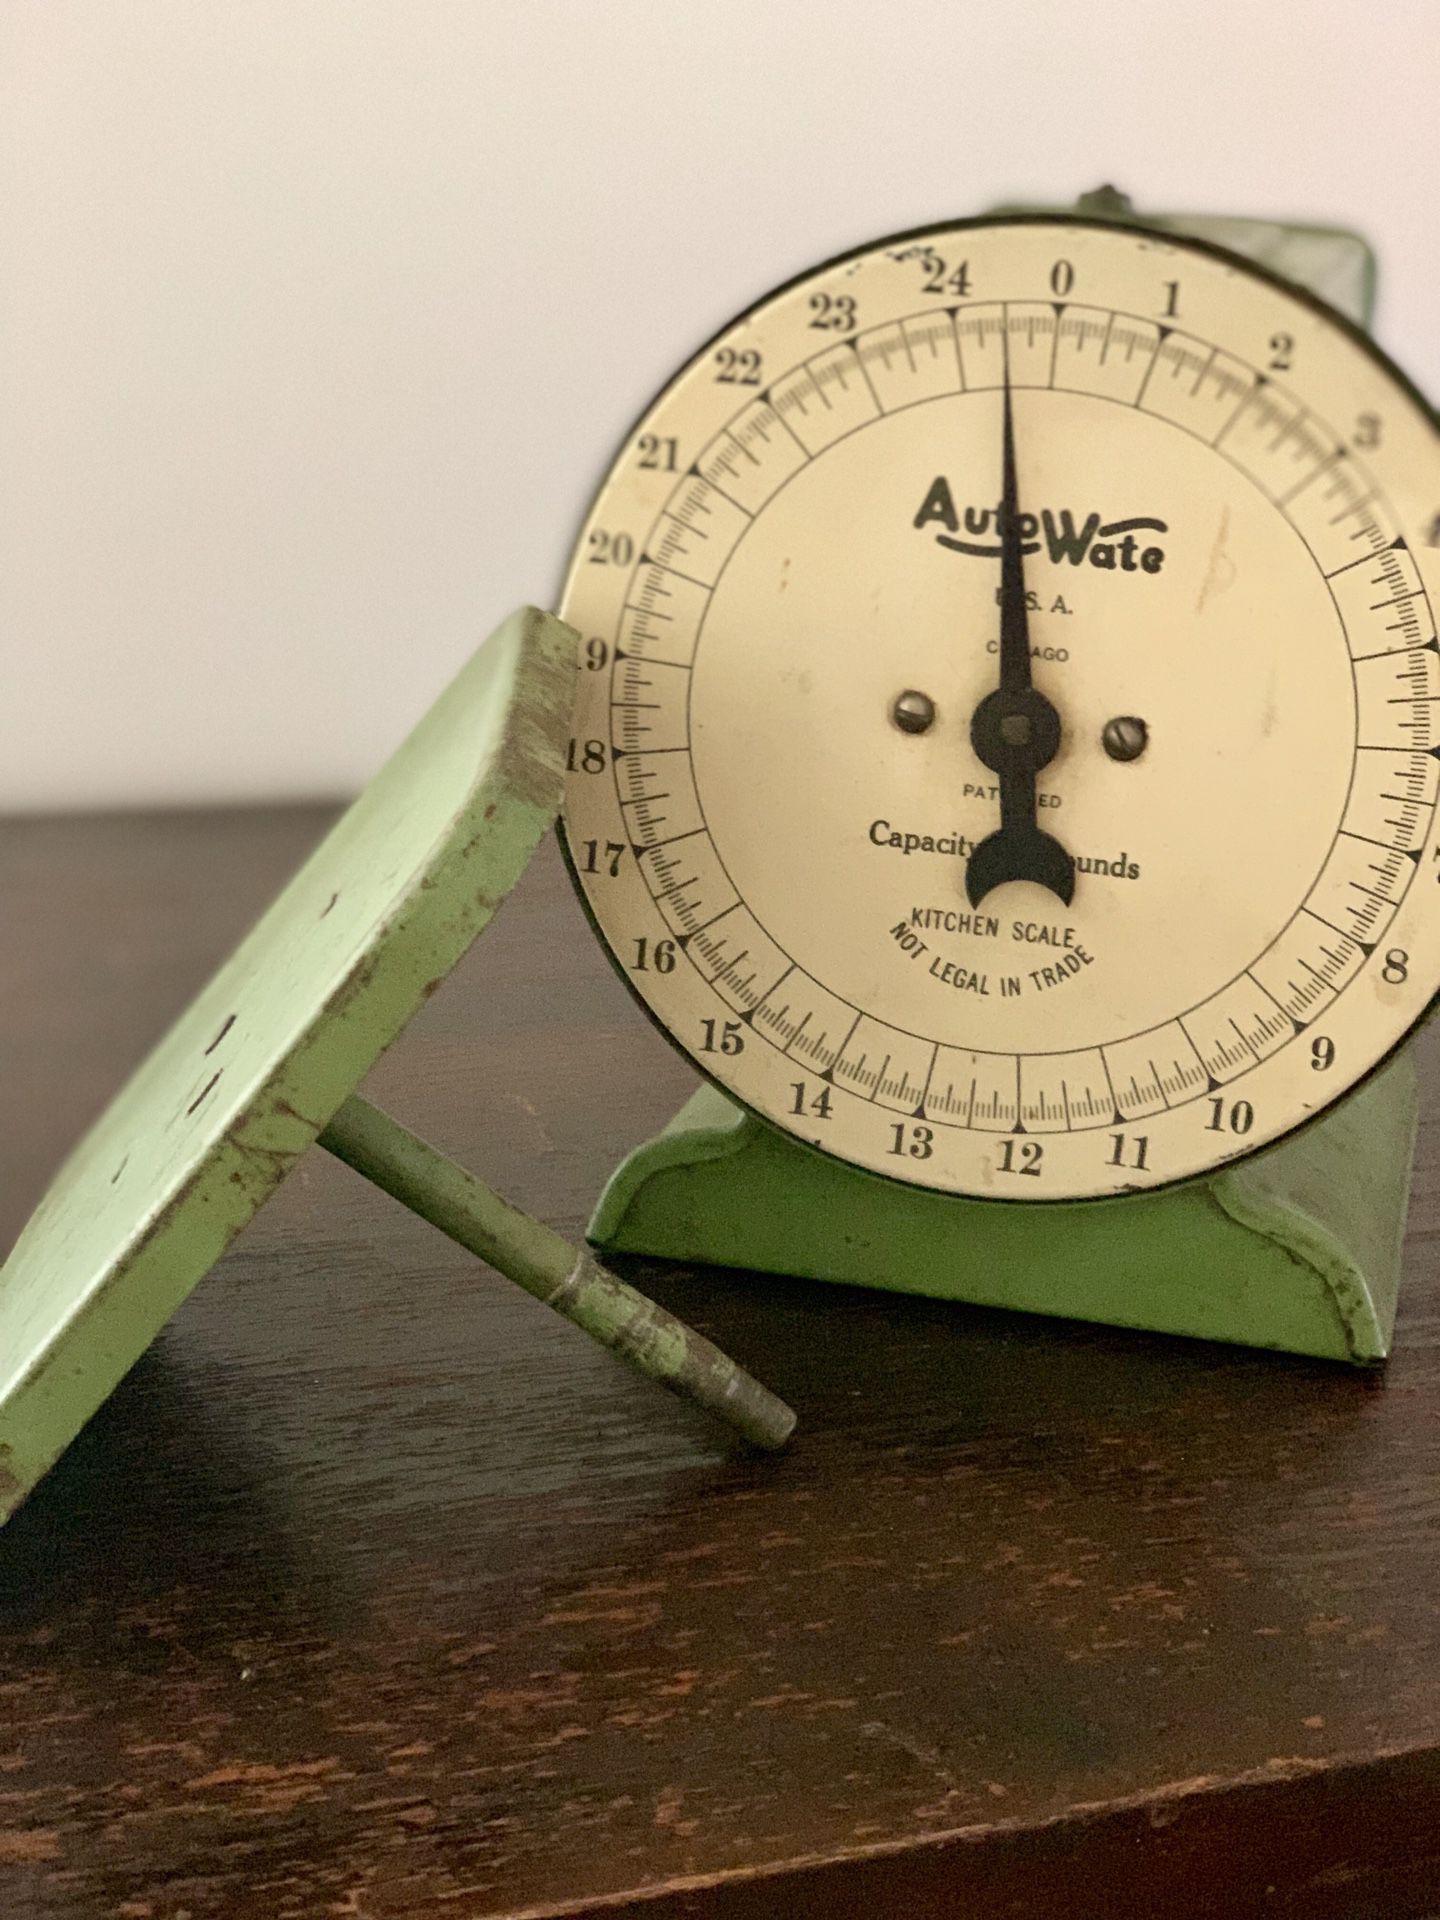 Vintage Mechanical Kitchen Scales, 1930s Weighing Balance, Made in